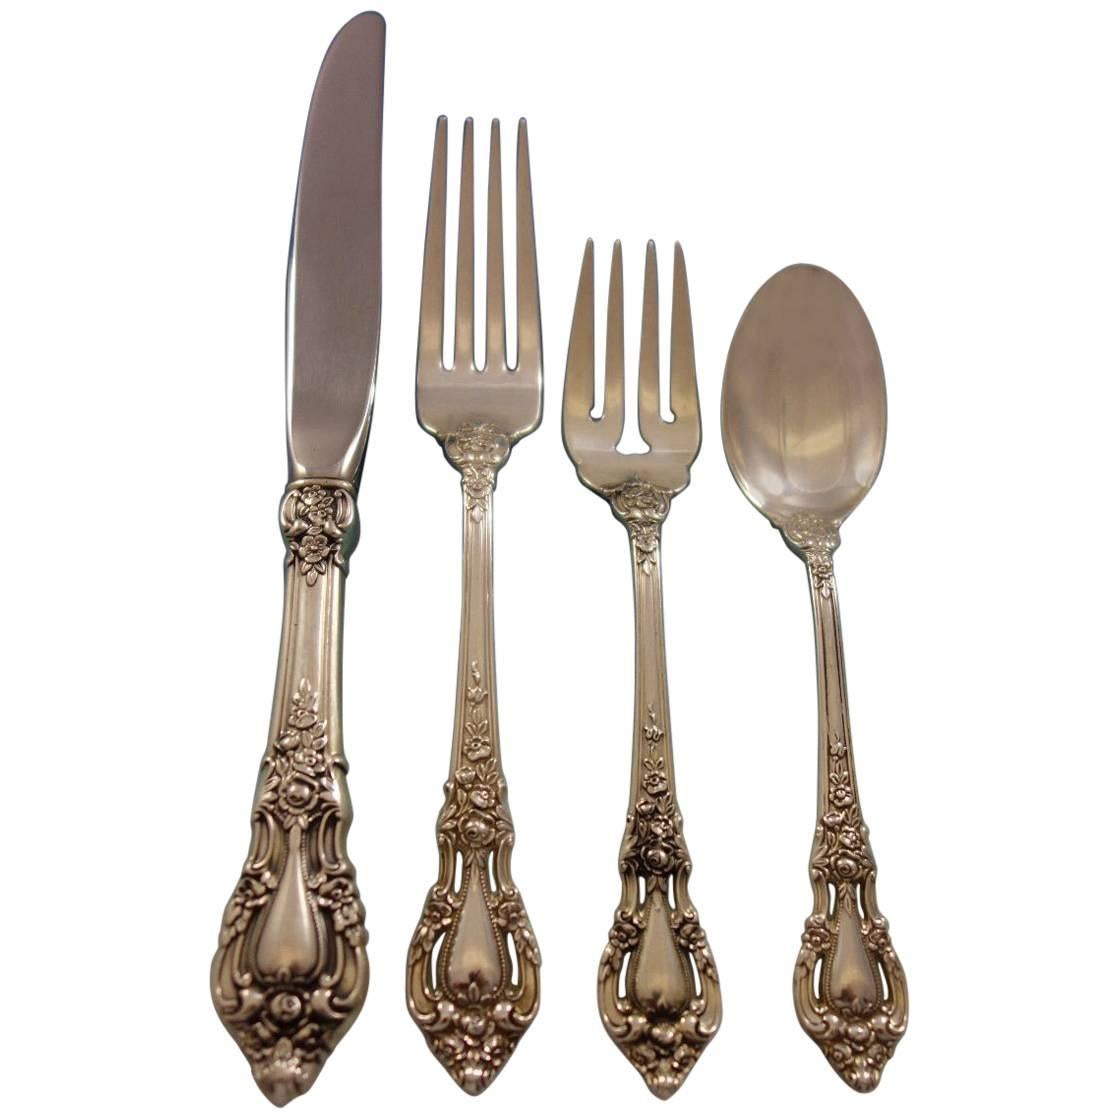 Eloquence by Lunt Sterling Silver Flatware Service for 8 Set 32 Pieces For Sale